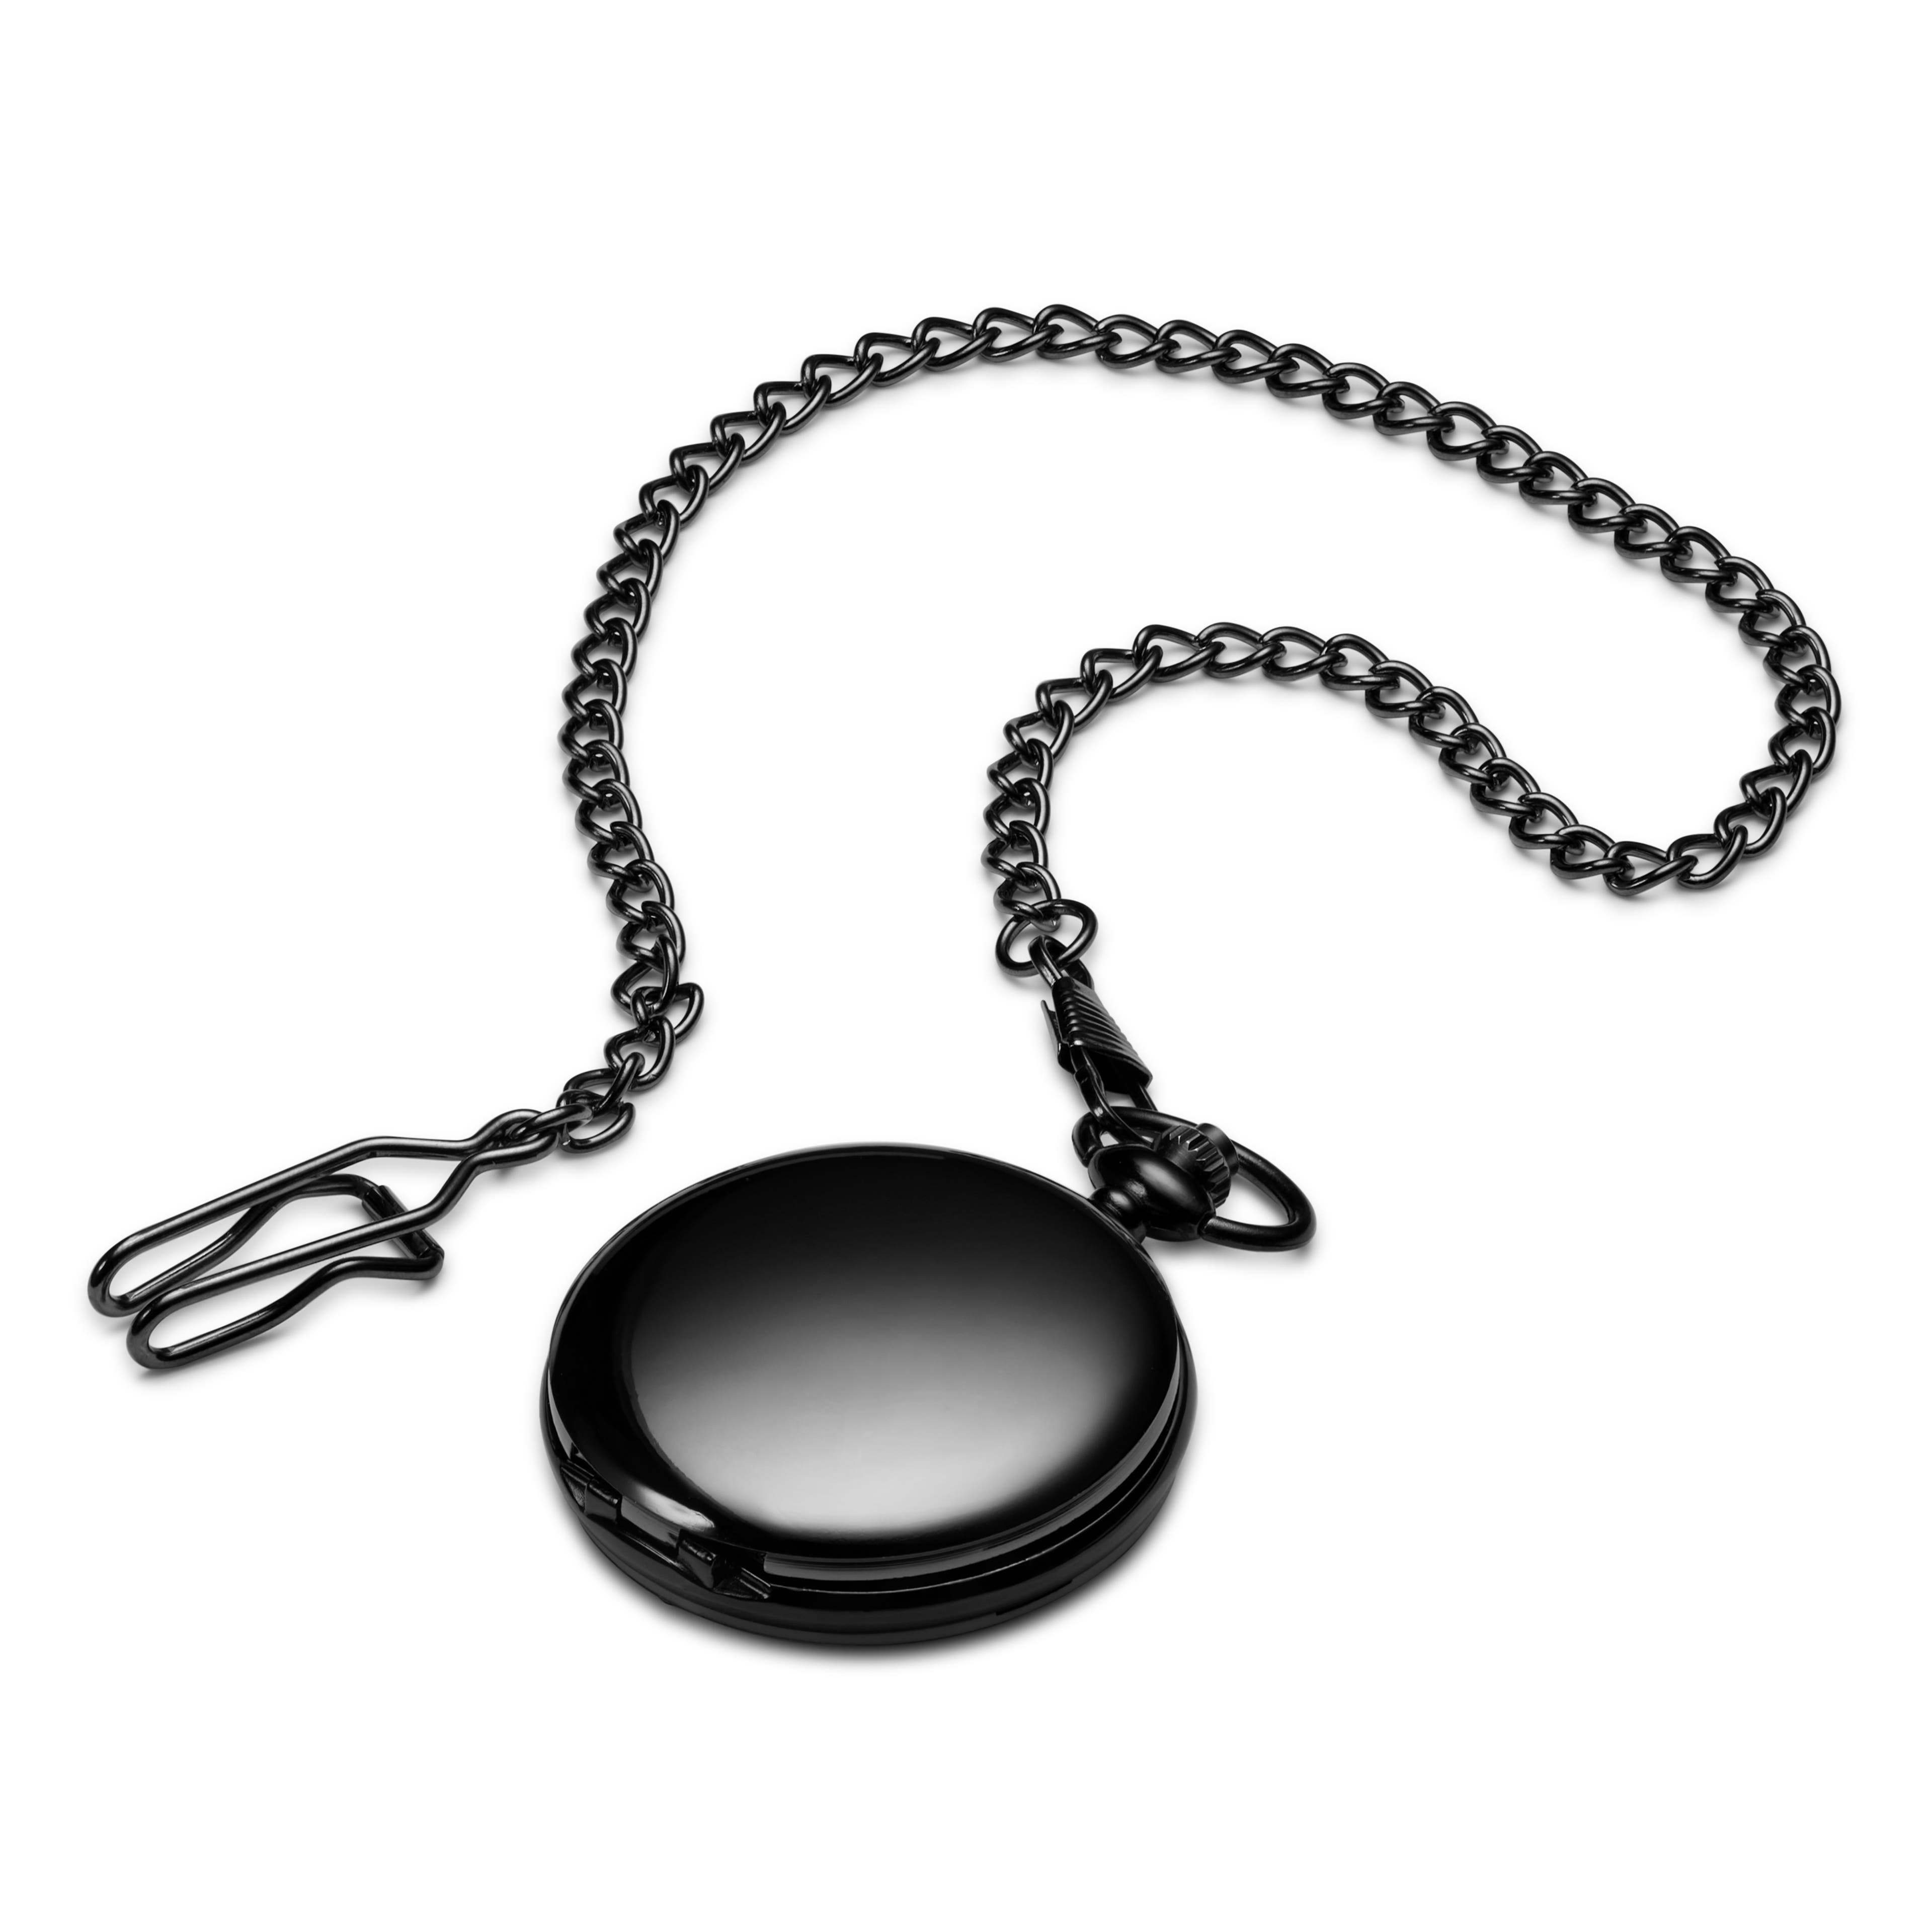 Black Stainless Steel Pocket Watch With White Dial